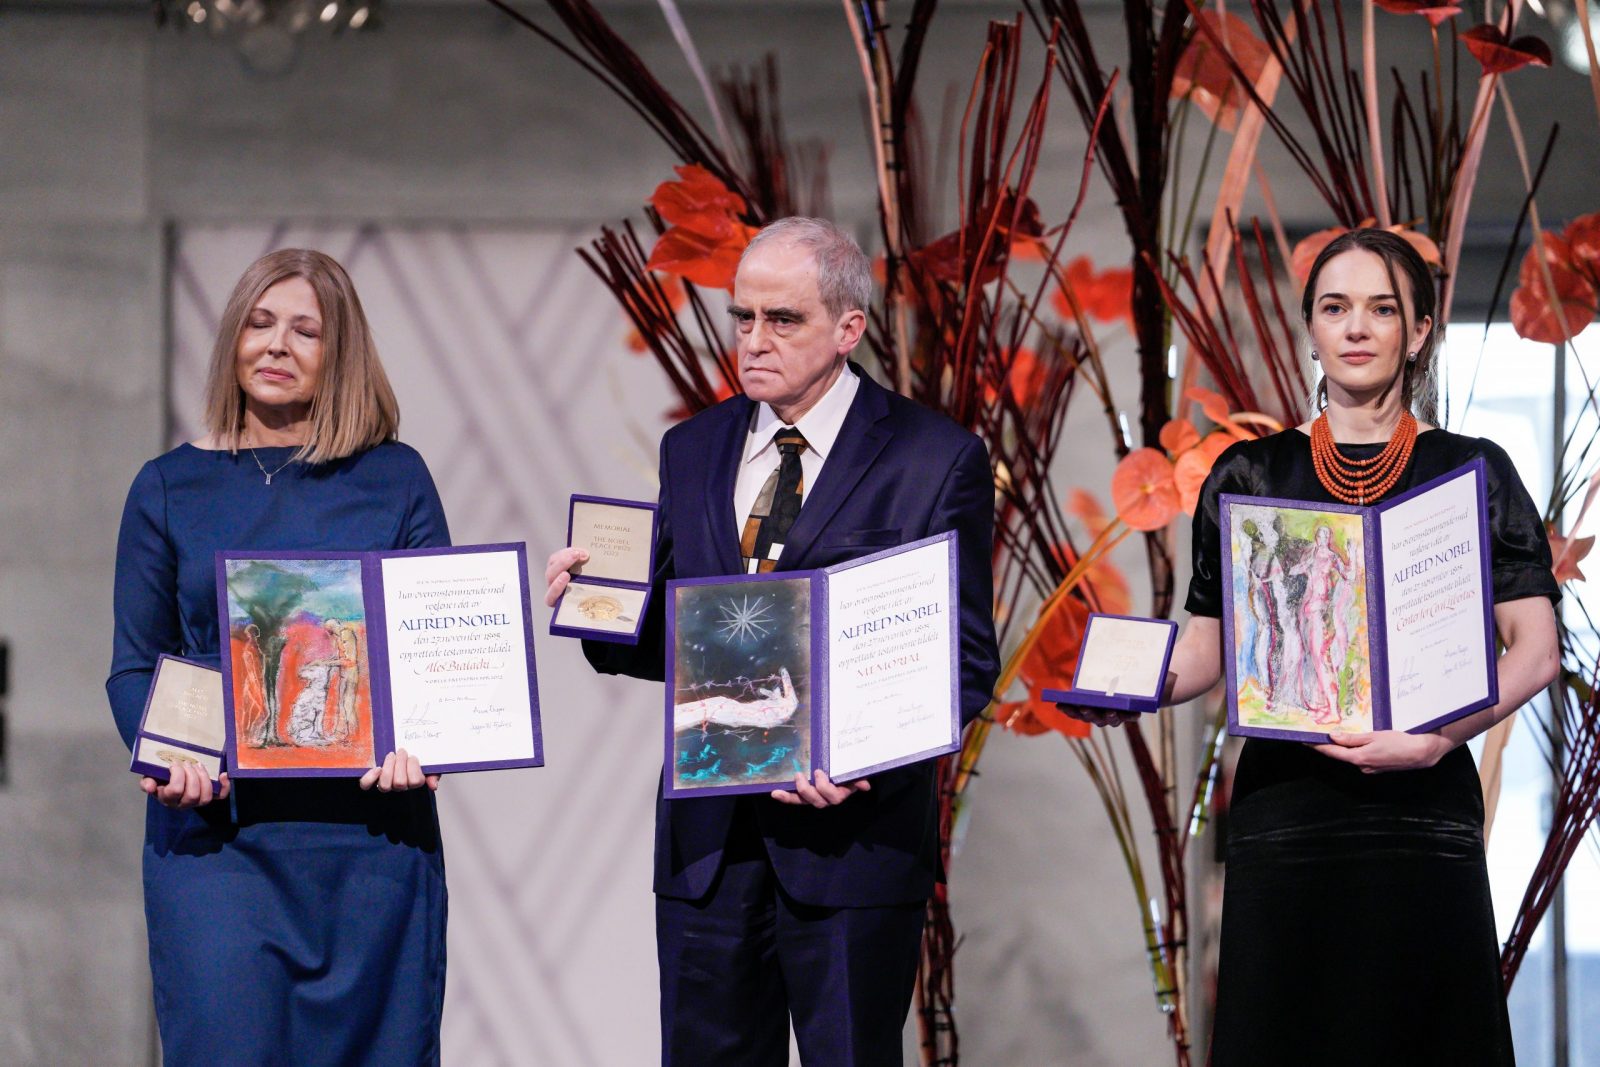 epa10358851 (L-R) Natallia Pintsyuk, representing her husband, the activist Ales Bialiatski from Belarus, Jan Rachinsky, representing the Russian organization Memorial and Oleksandra Matviichuk, representing the Ukrainian organization Center for Civil Liberties (CCL) pose together with their awards and certificates at the awarding of the Nobel Peace Prize for 2022 in the Town Hall in Oslo, Norway, 10 December 2022. CCL, Memorial and Bialiatski receive the award for their work for human rights in Ukraine, Russia and Belarus.  EPA/Javad Parsa / POOL NORWAY OUT